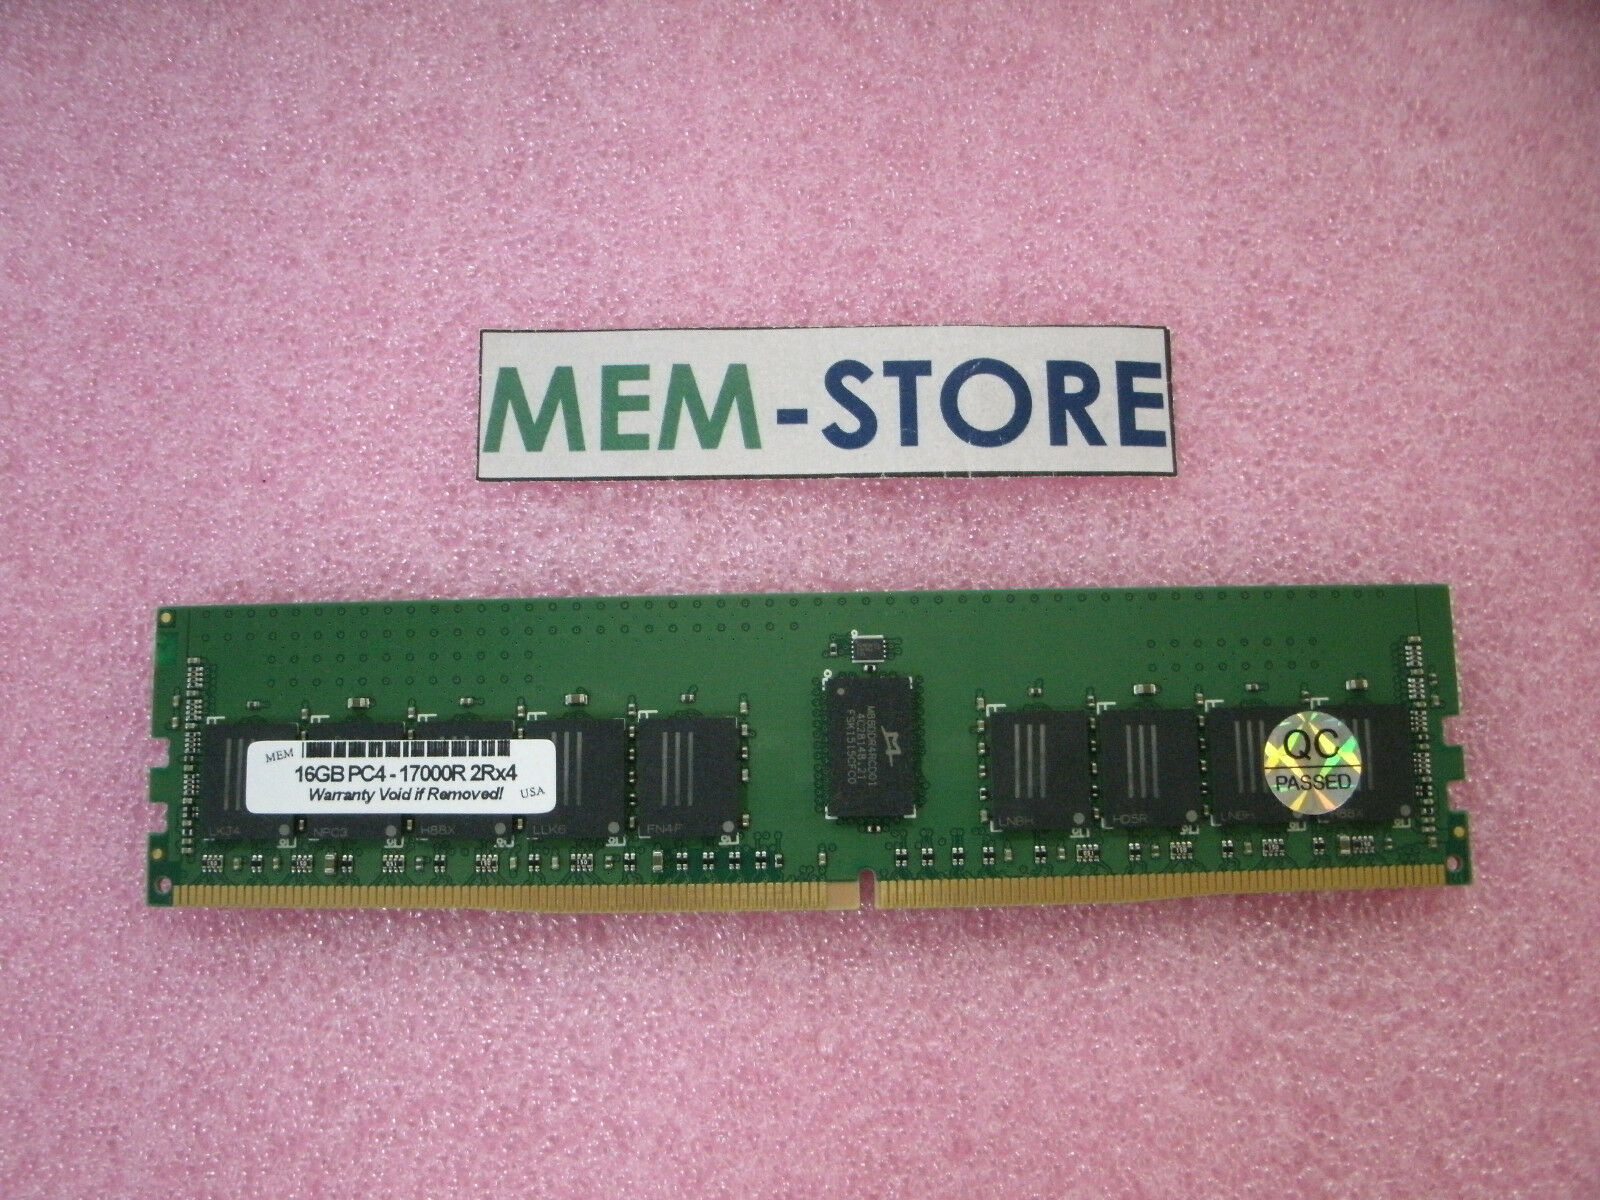 4X70G78062 16GB DDR4 2133MHz PC4-17000 RDIMM RAM Memory ThinkStation P500 P700 P900 (3rd Party) - image 1 of 1